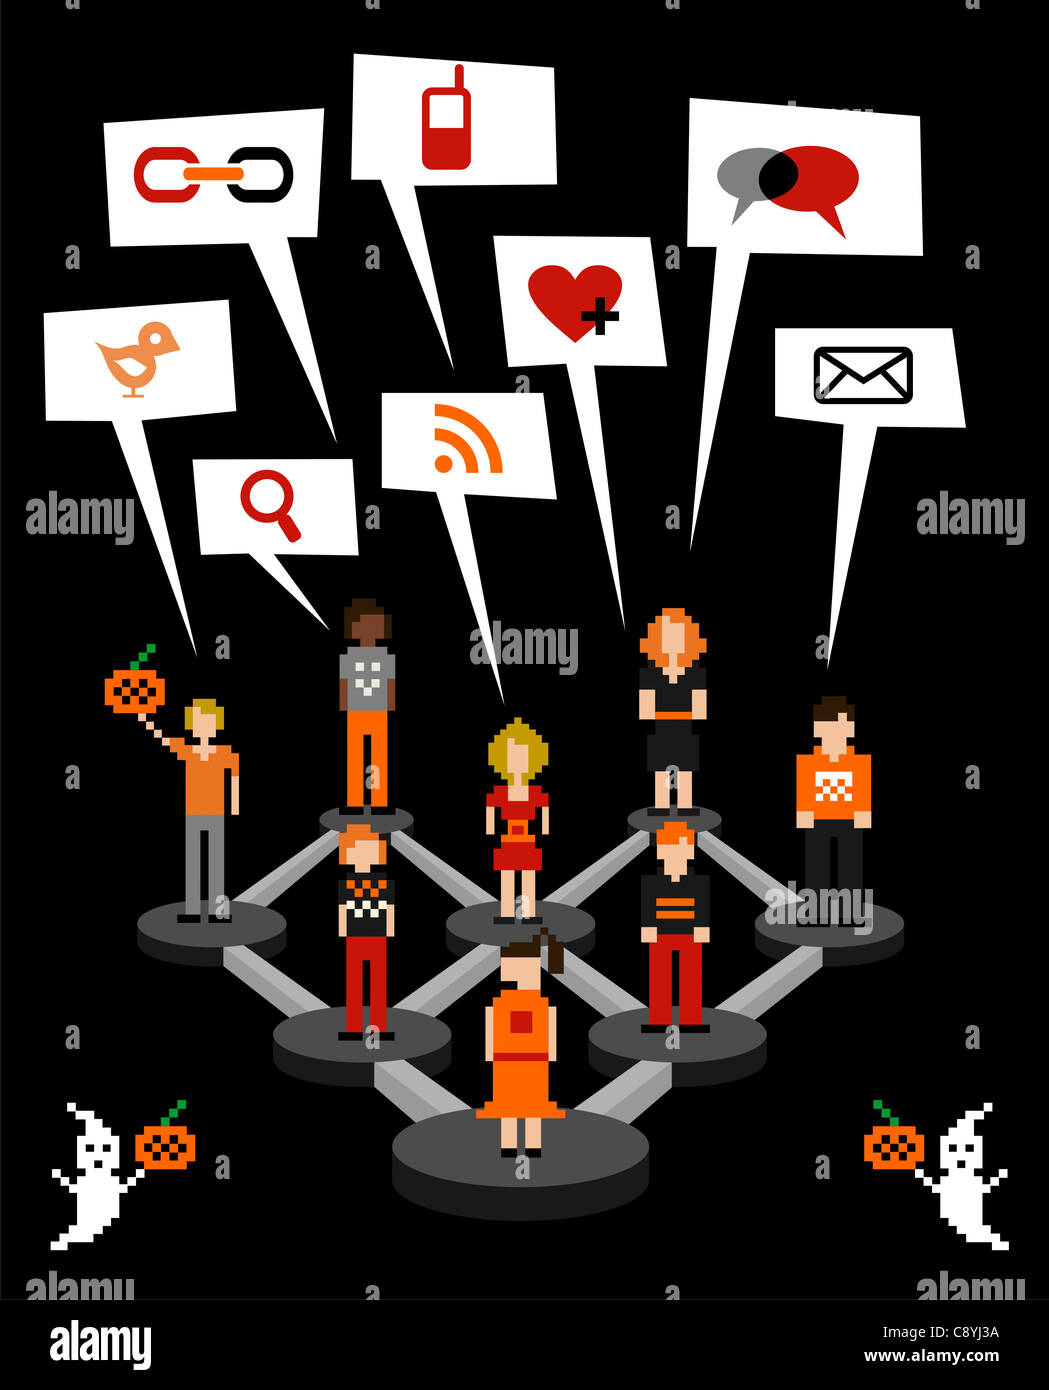 Web social relationship diagram showing people connected in Halloween seasonal. Stock Photo